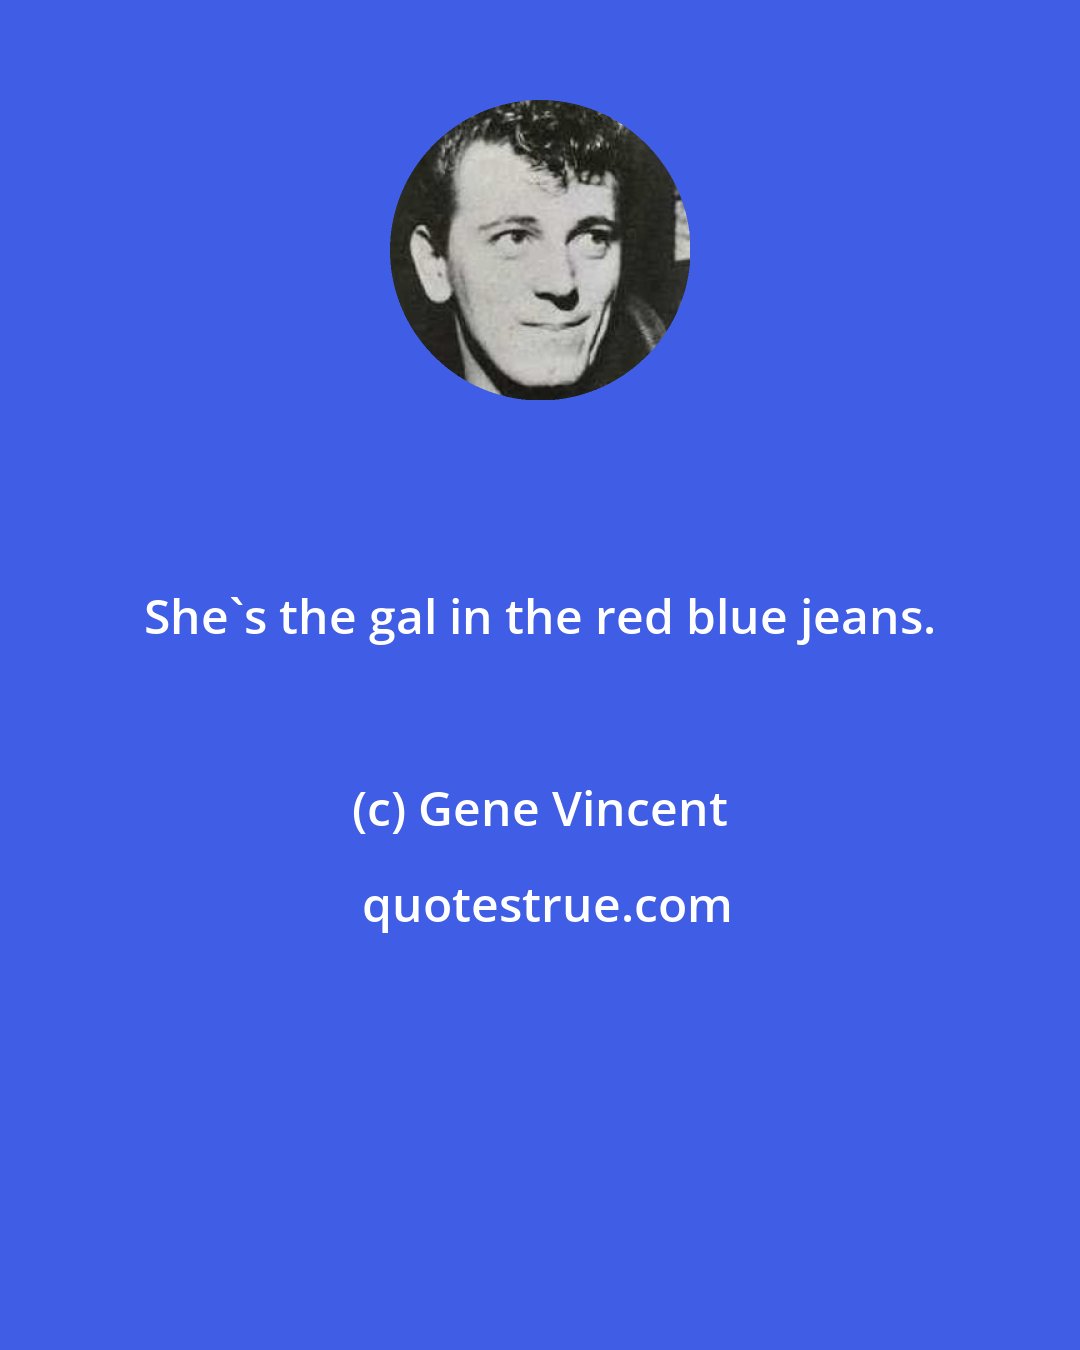 Gene Vincent: She's the gal in the red blue jeans.